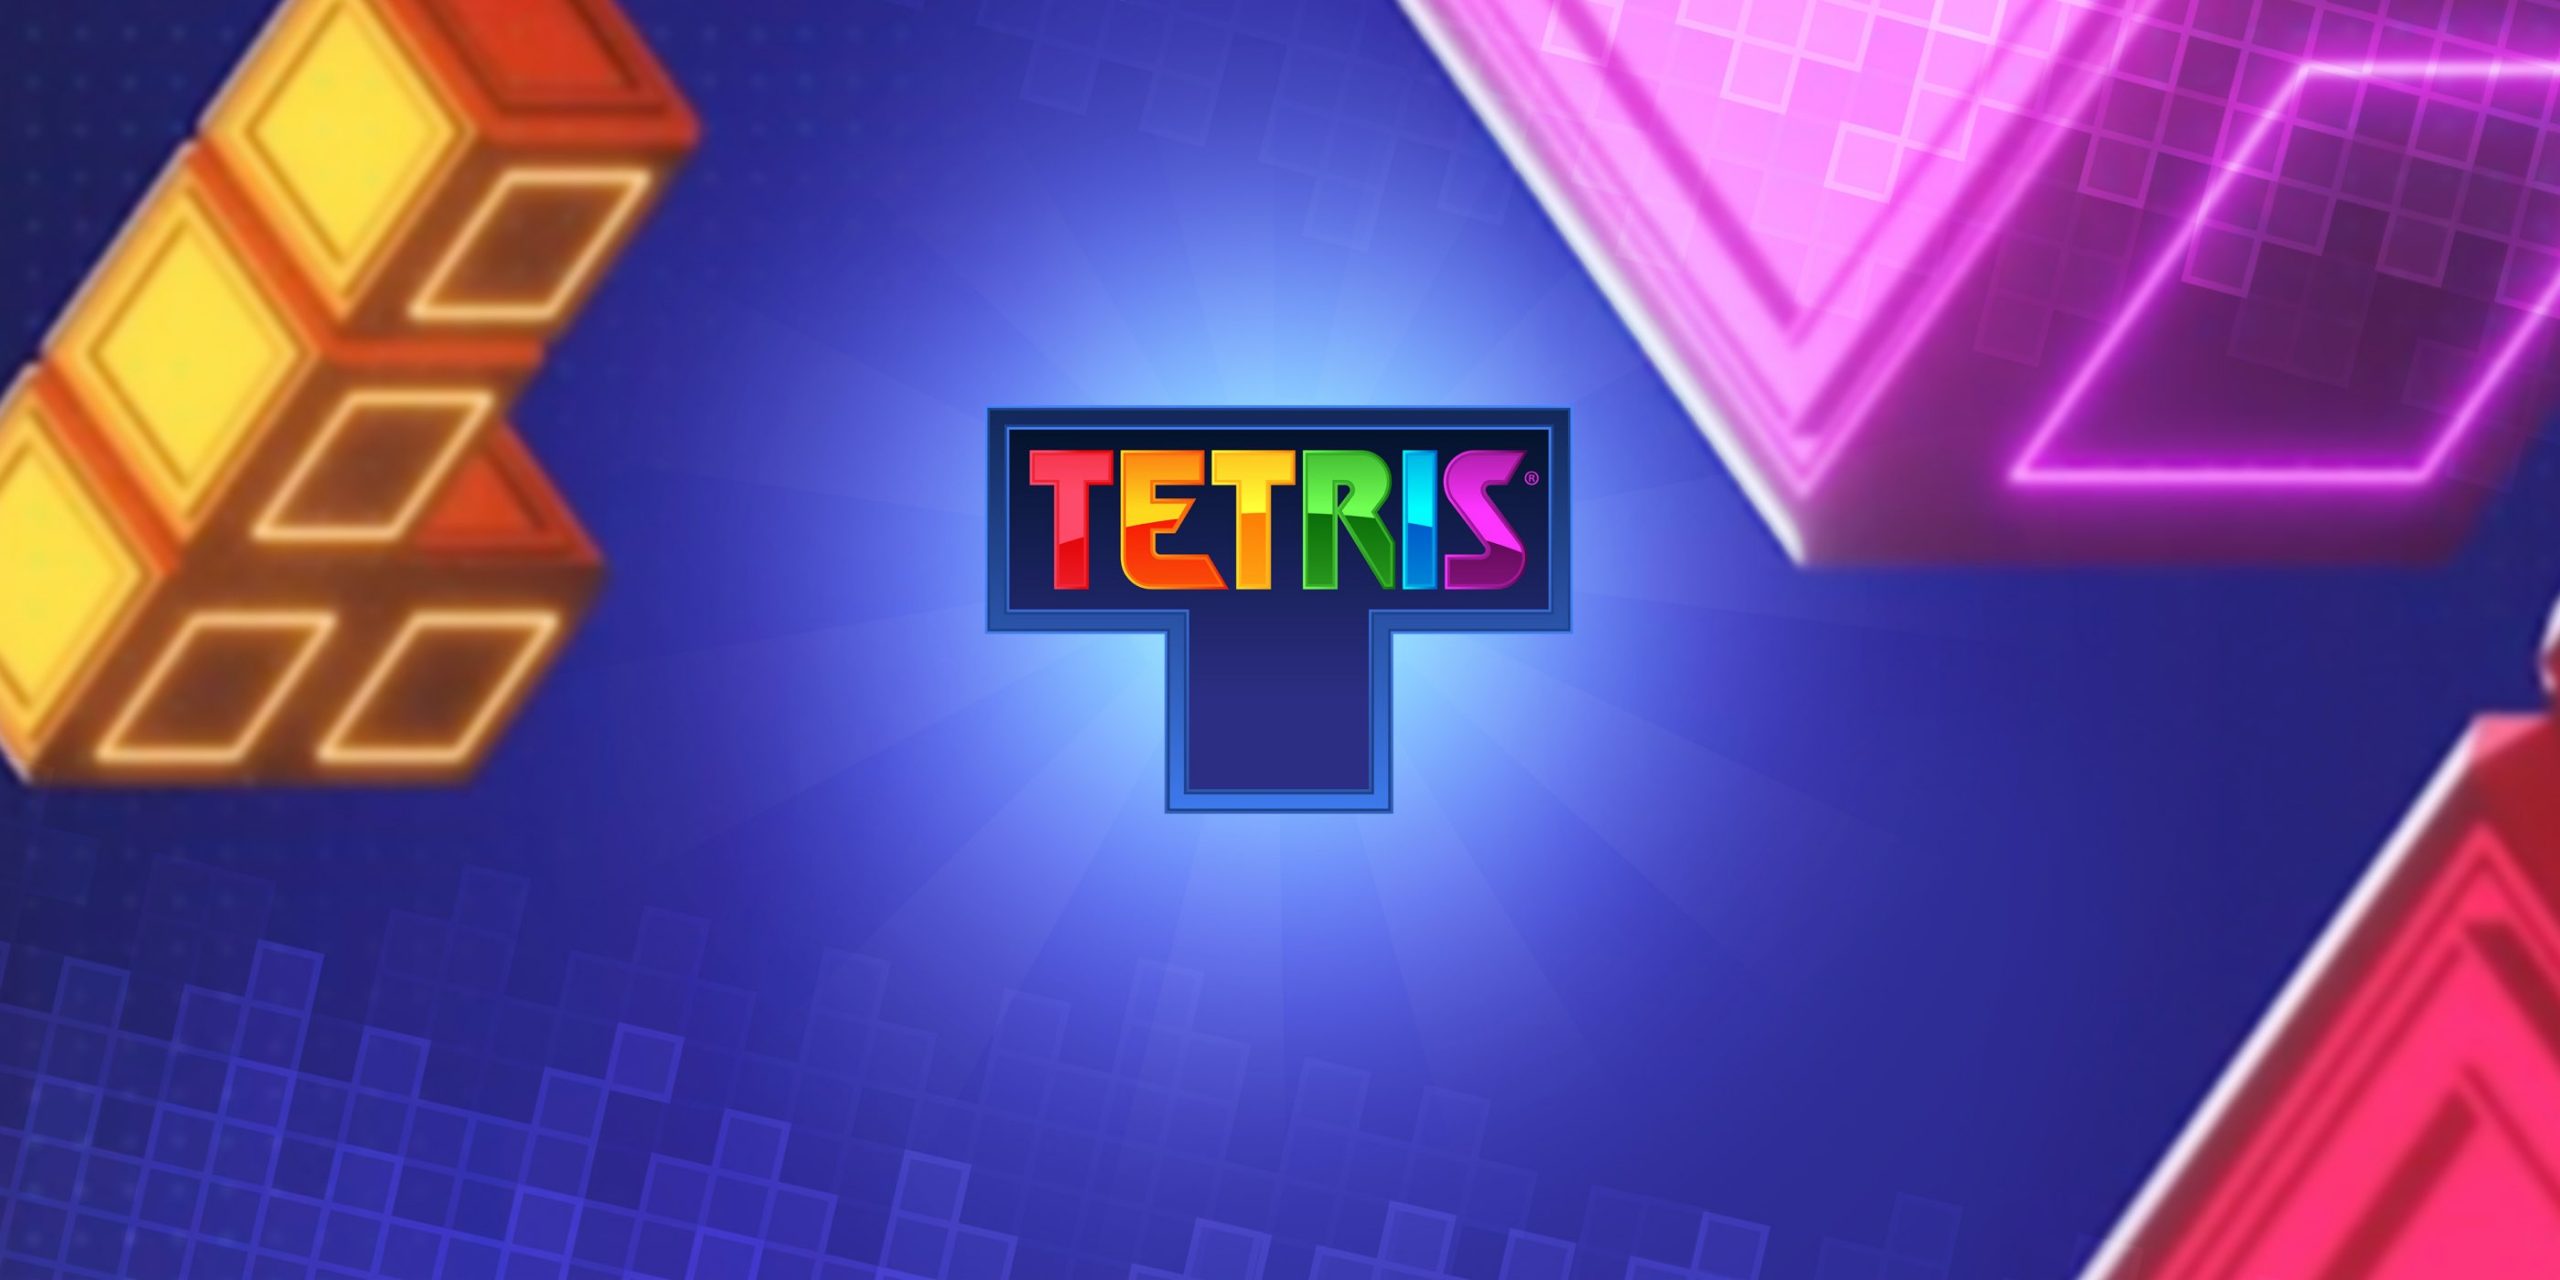 A brand new official Tetris game with swipe controls, haptic feedback &  more hits App Store